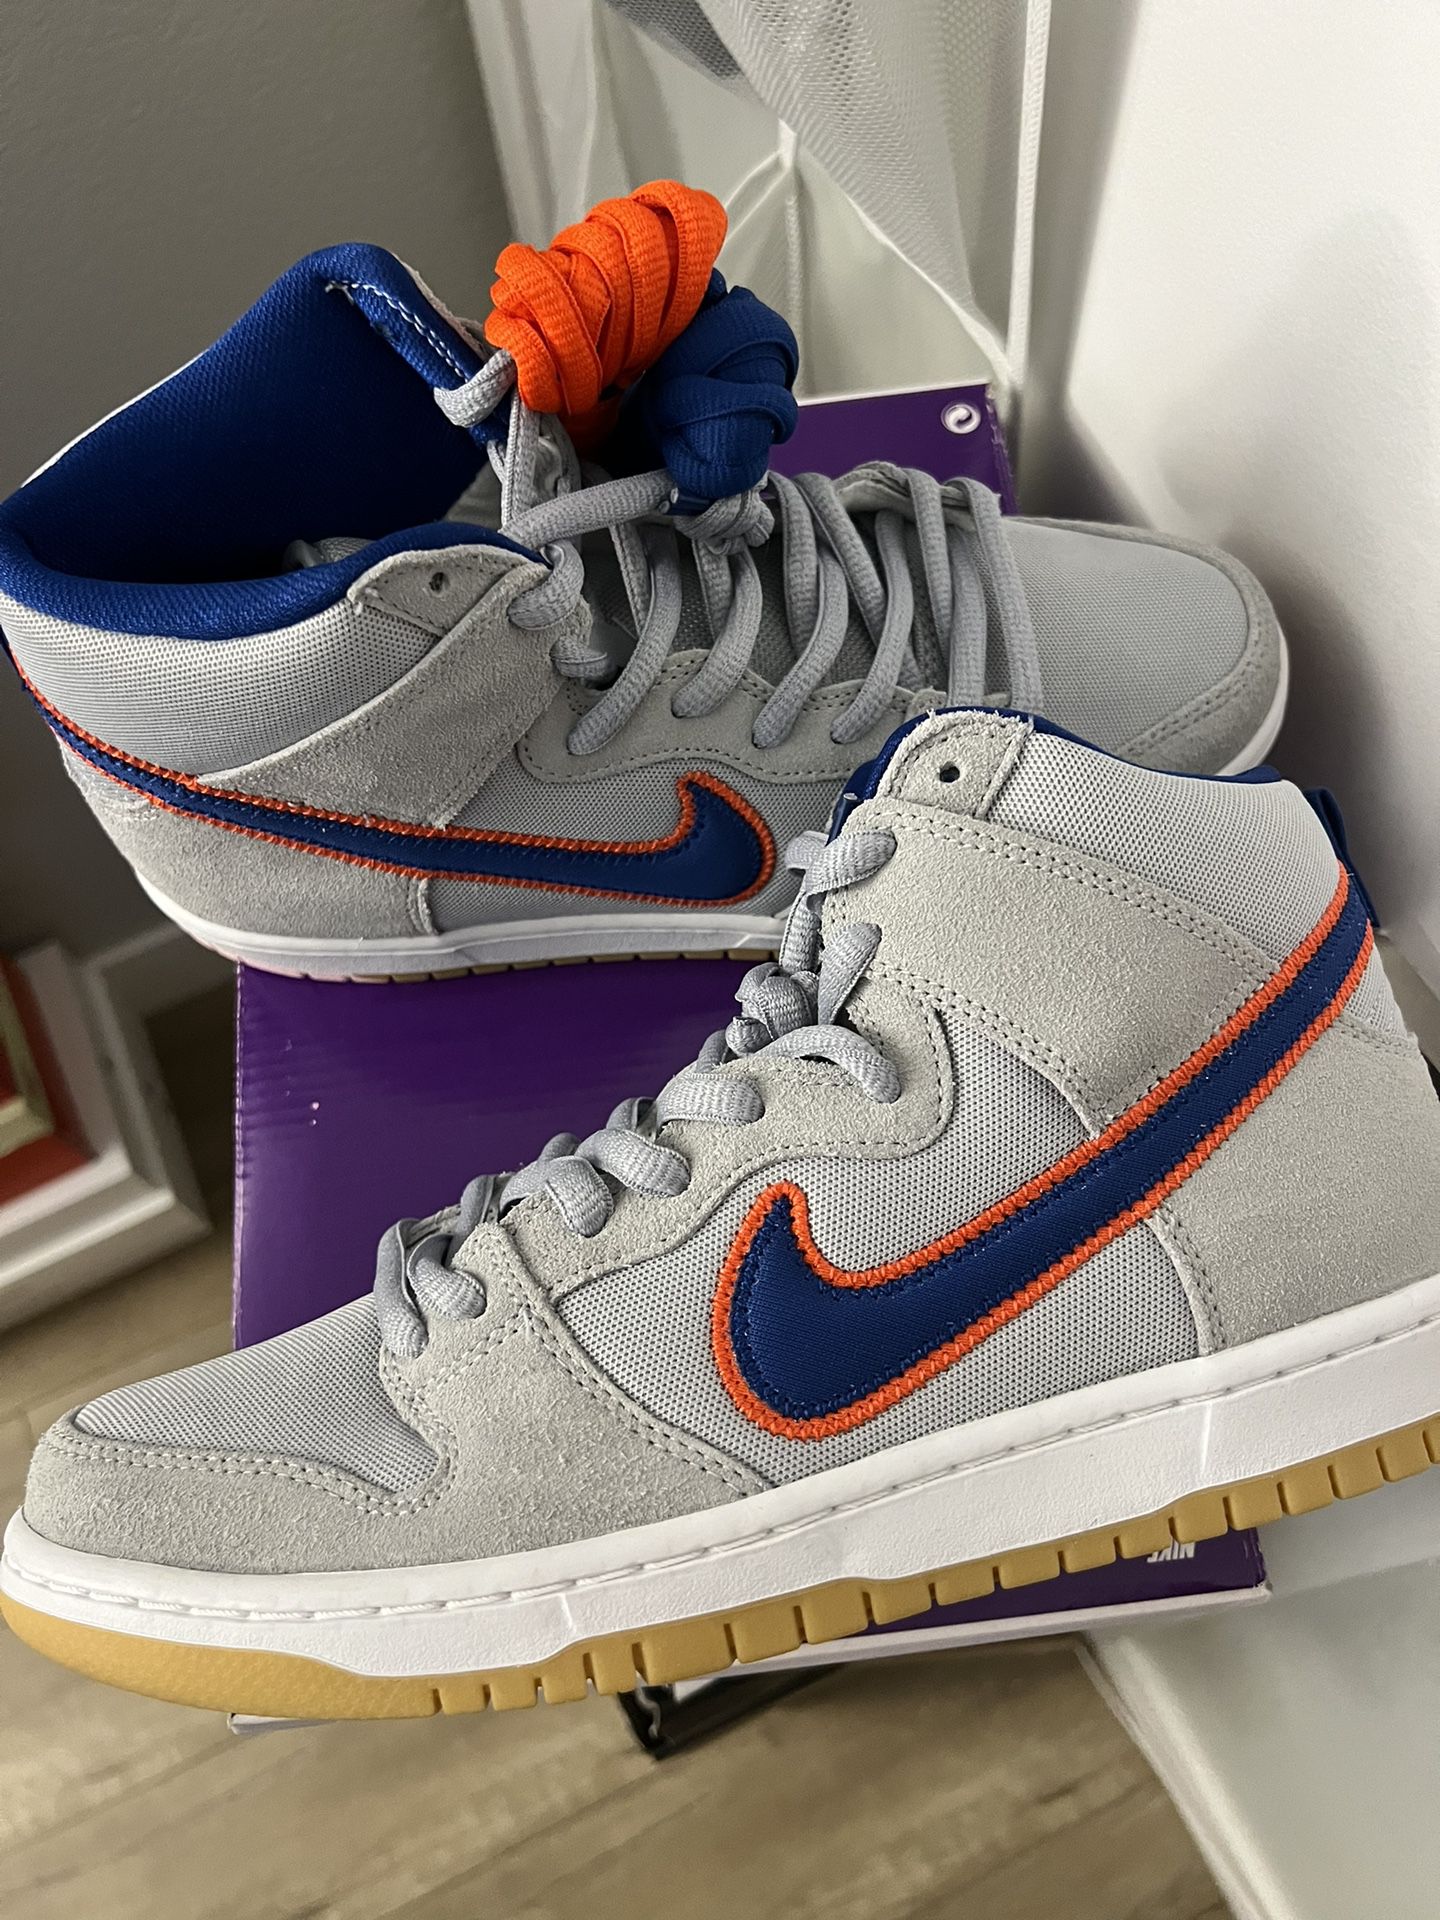 Nike Dunk SB High New York Mets Colorway Brand New for Sale in Hayward, CA  - OfferUp